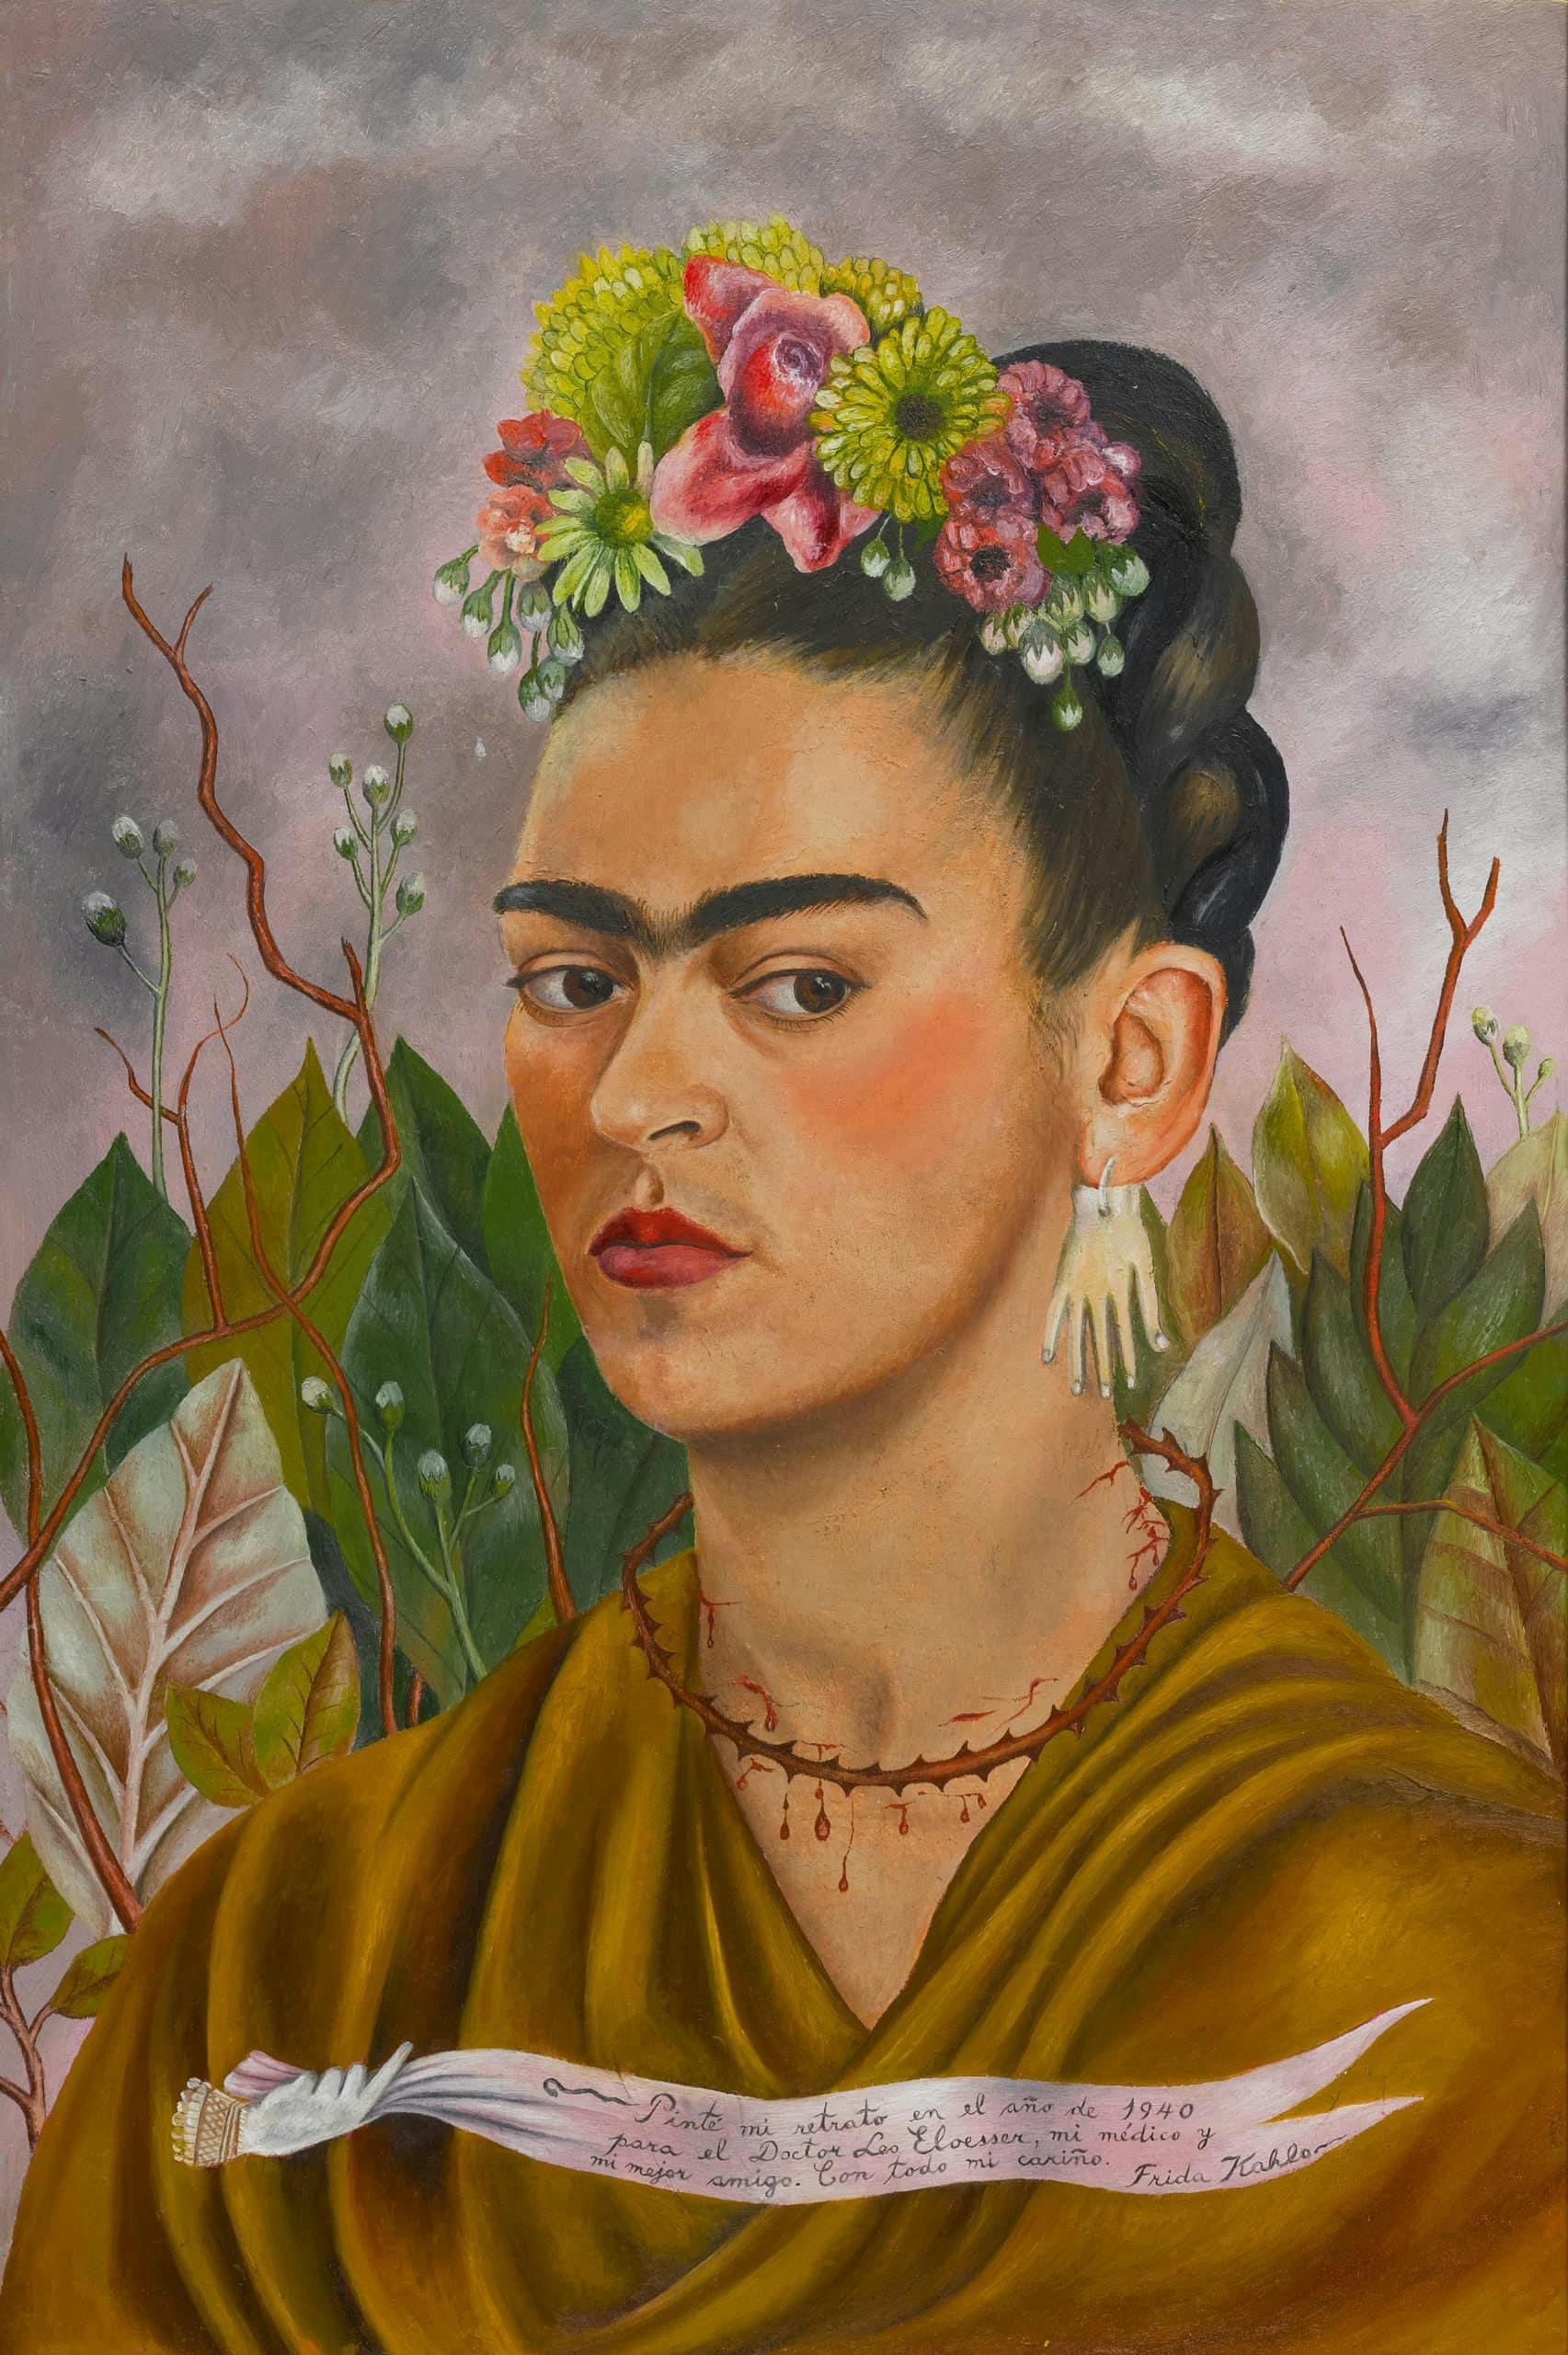 <p>Frida Kahlo, 1907-1954<br />
Self-Portrait Dedicated to Dr. Leo Eloesser, 1940<br />
Oil on Masonite (?)<br />
Private Collection<br />
© 2020 Banco de México Diego Rivera Frida Kahlo Museums Trust, Mexico, D.F. / Artists Rights Society (ARS), New York</p>
